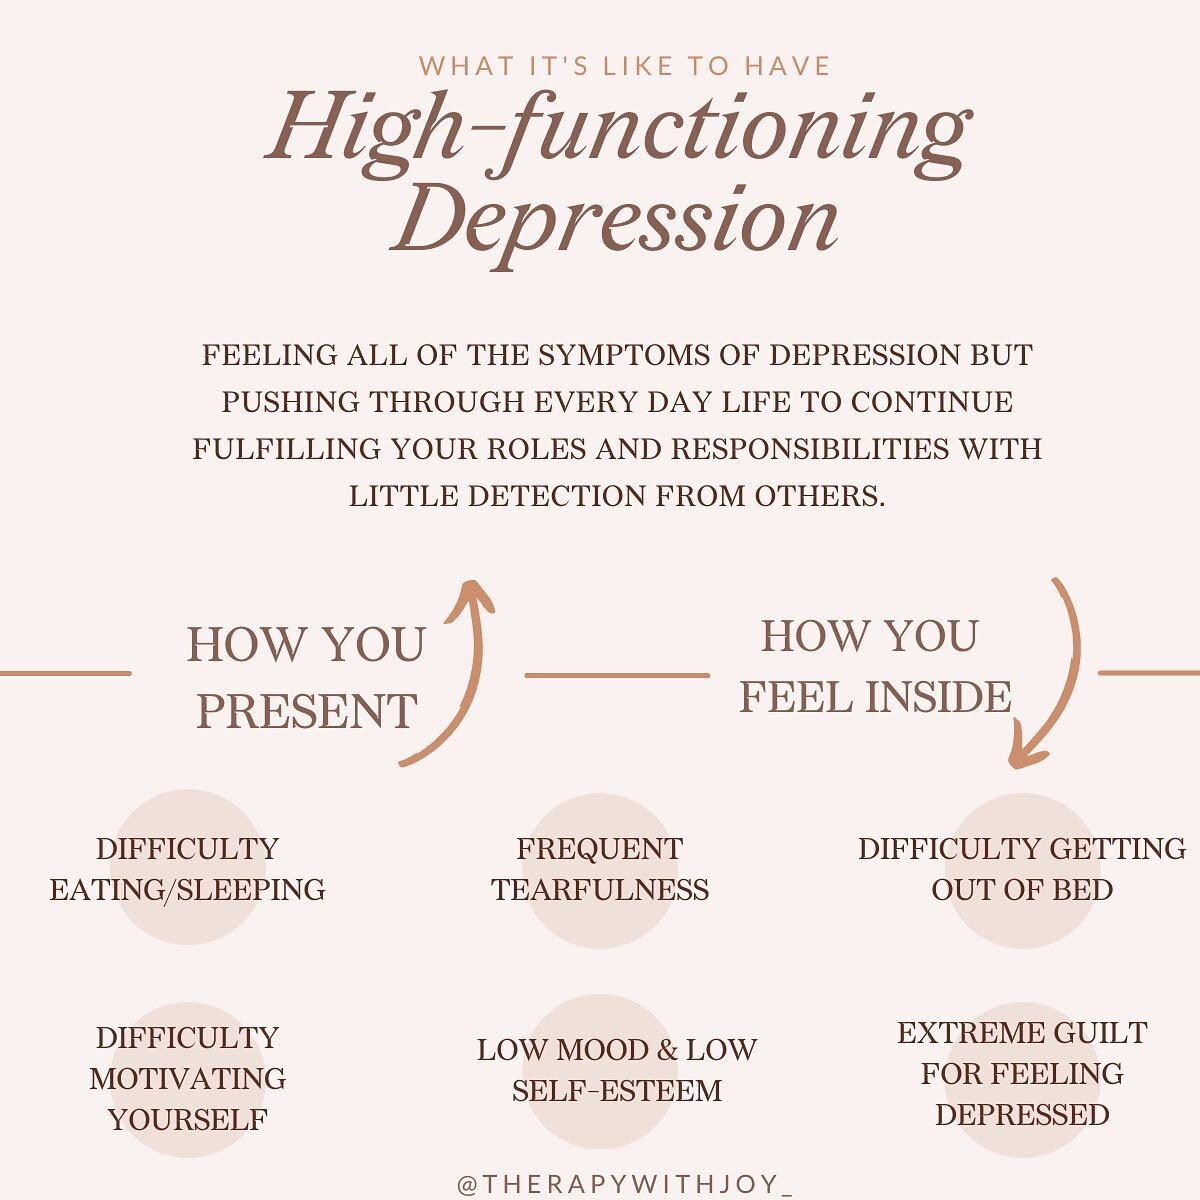 Like high functioning anxiety, high functioning depression can be difficult to miss in people who appear to be &ldquo;normal&rdquo;. Mental illness has many faces and presentations but whether you present to be &ldquo;ok&rdquo; to others struggling, 